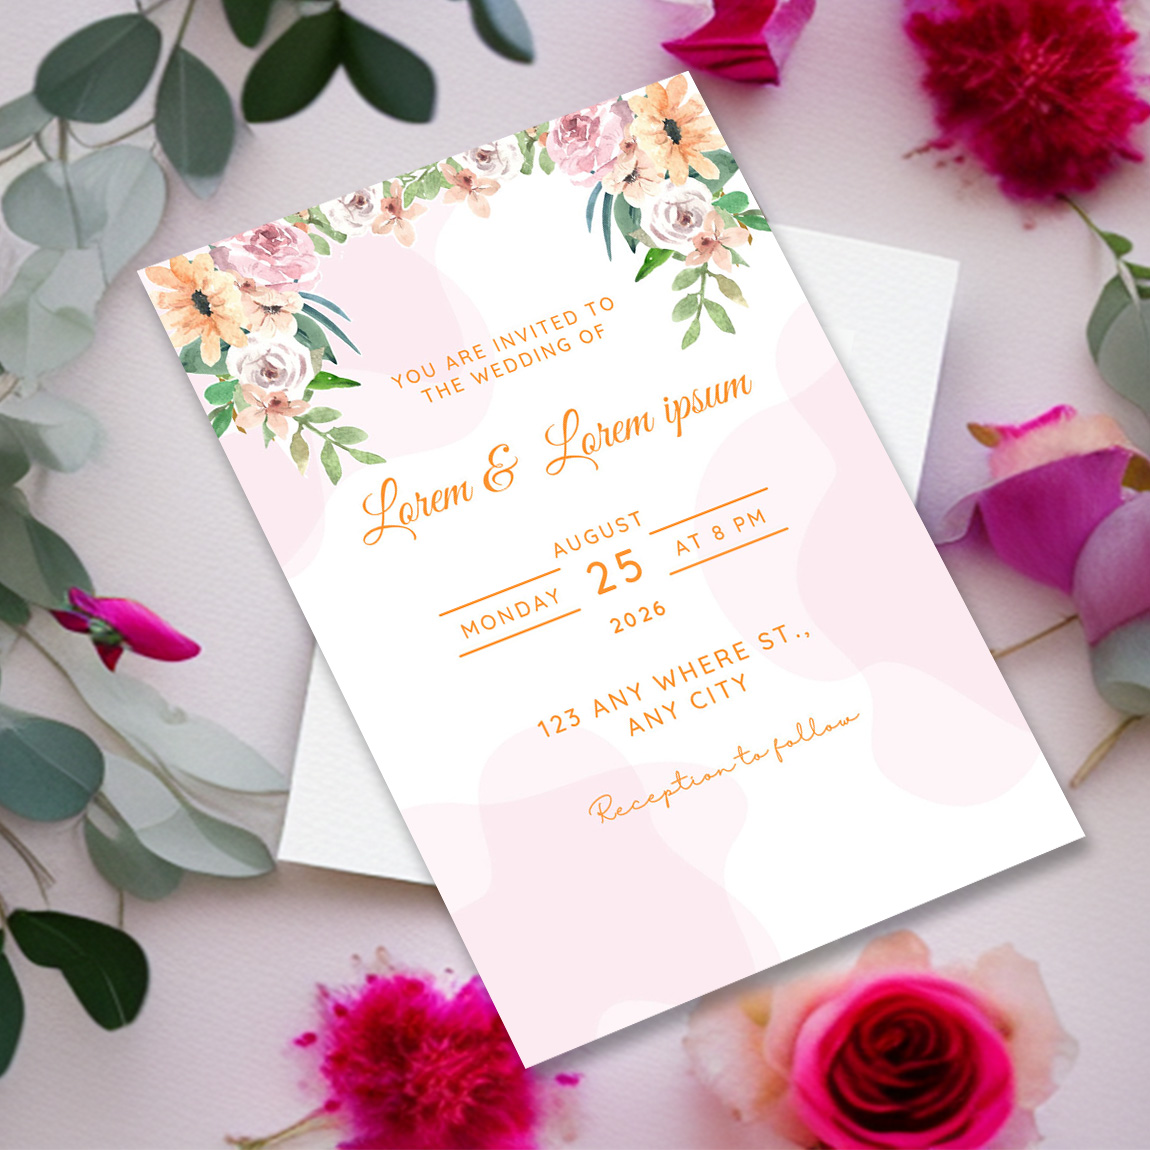 Image with enchanting wedding invitation with flowers and leaves.